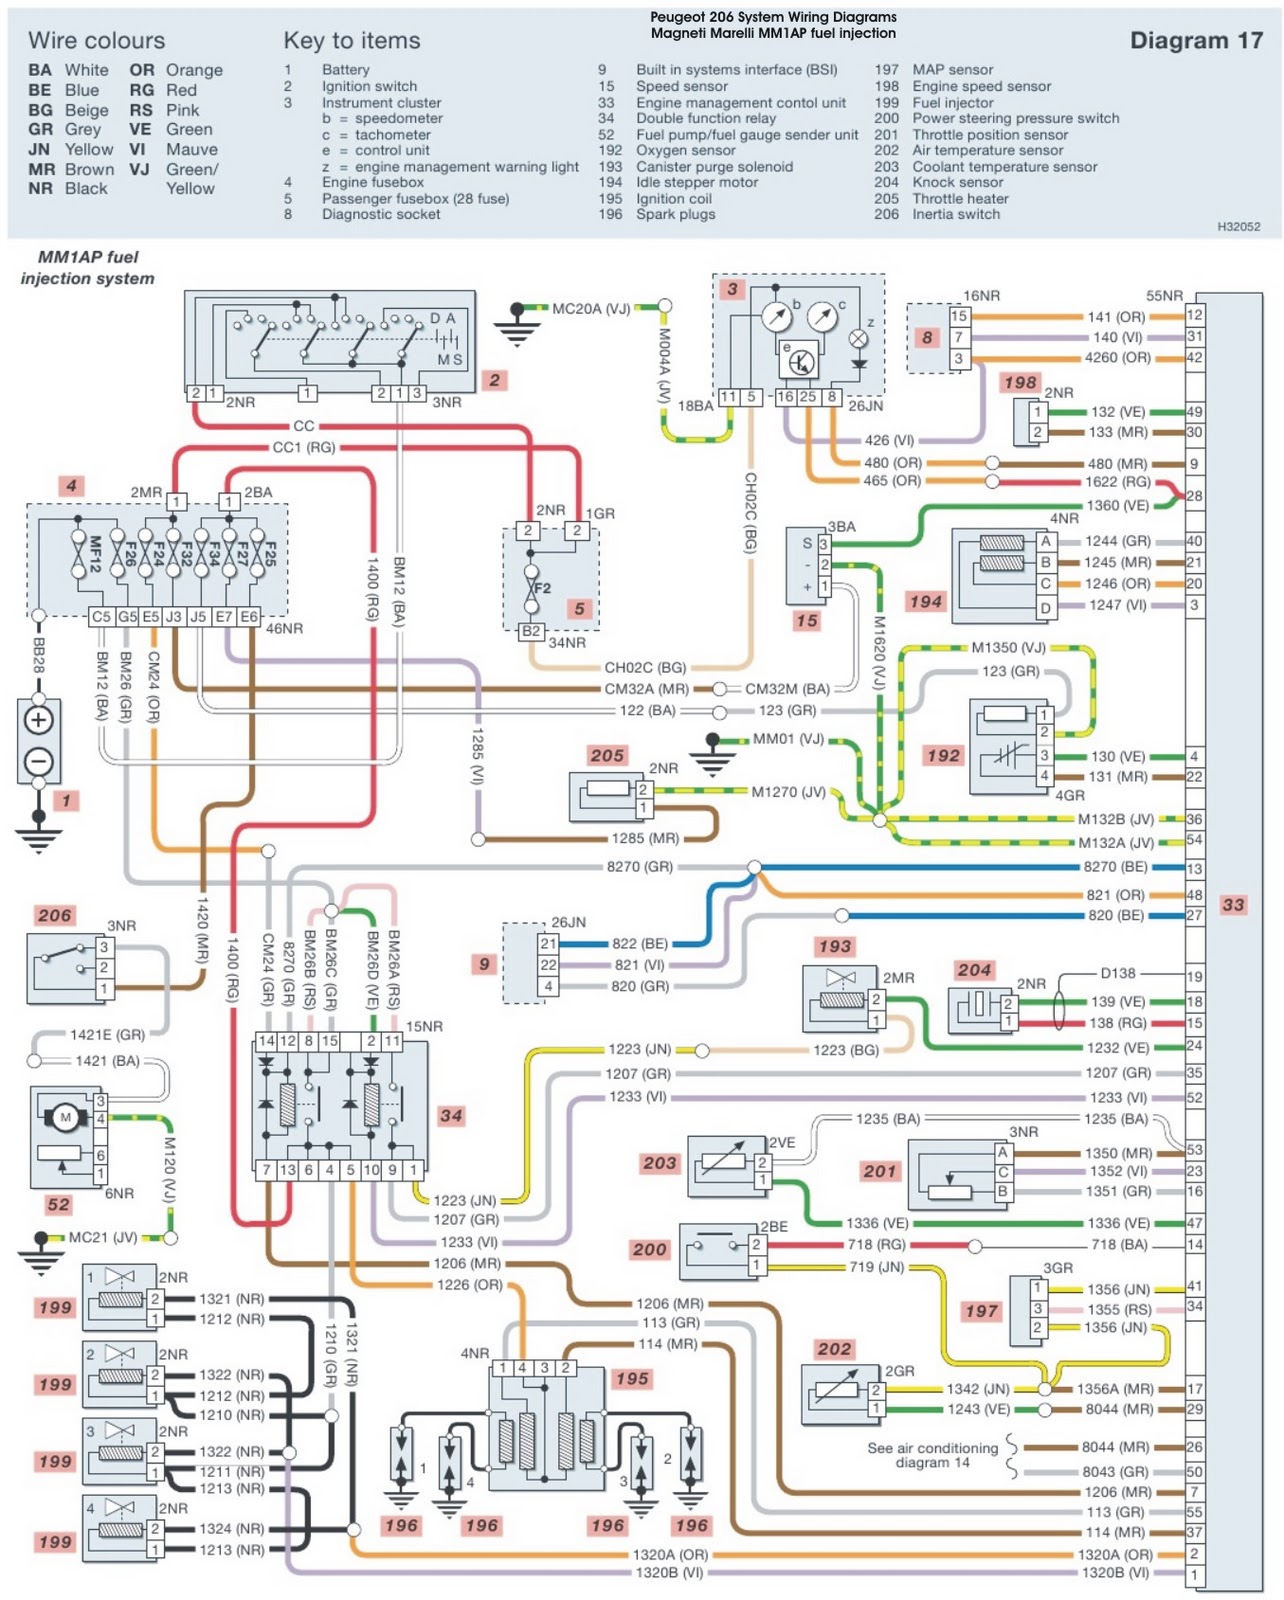 Peugeot 206 Fuel Injection System Wiring Diagrams | Schematic Wiring